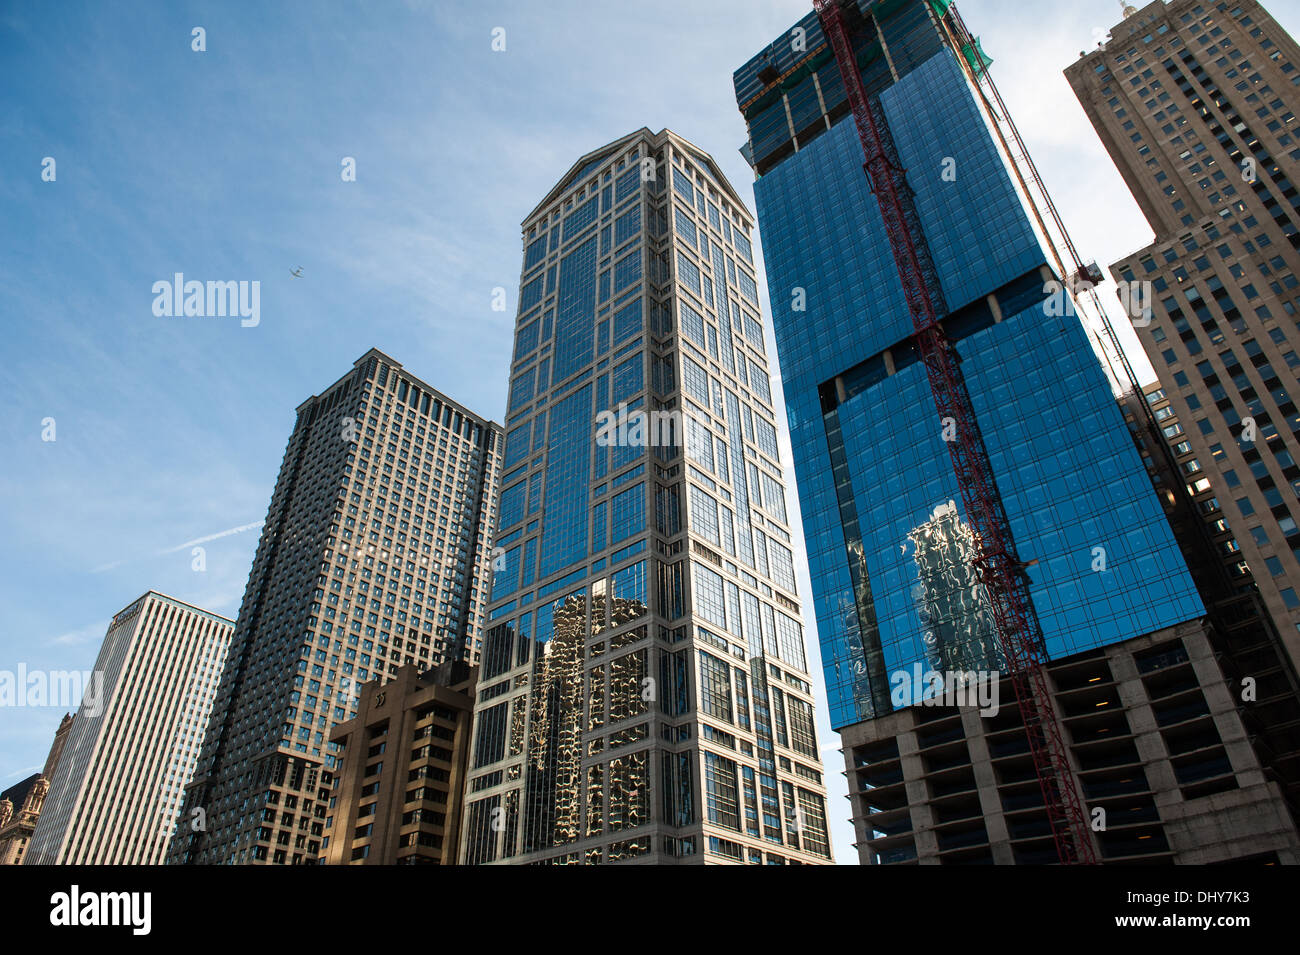 The 111 W. Wacker building seen under construction among other